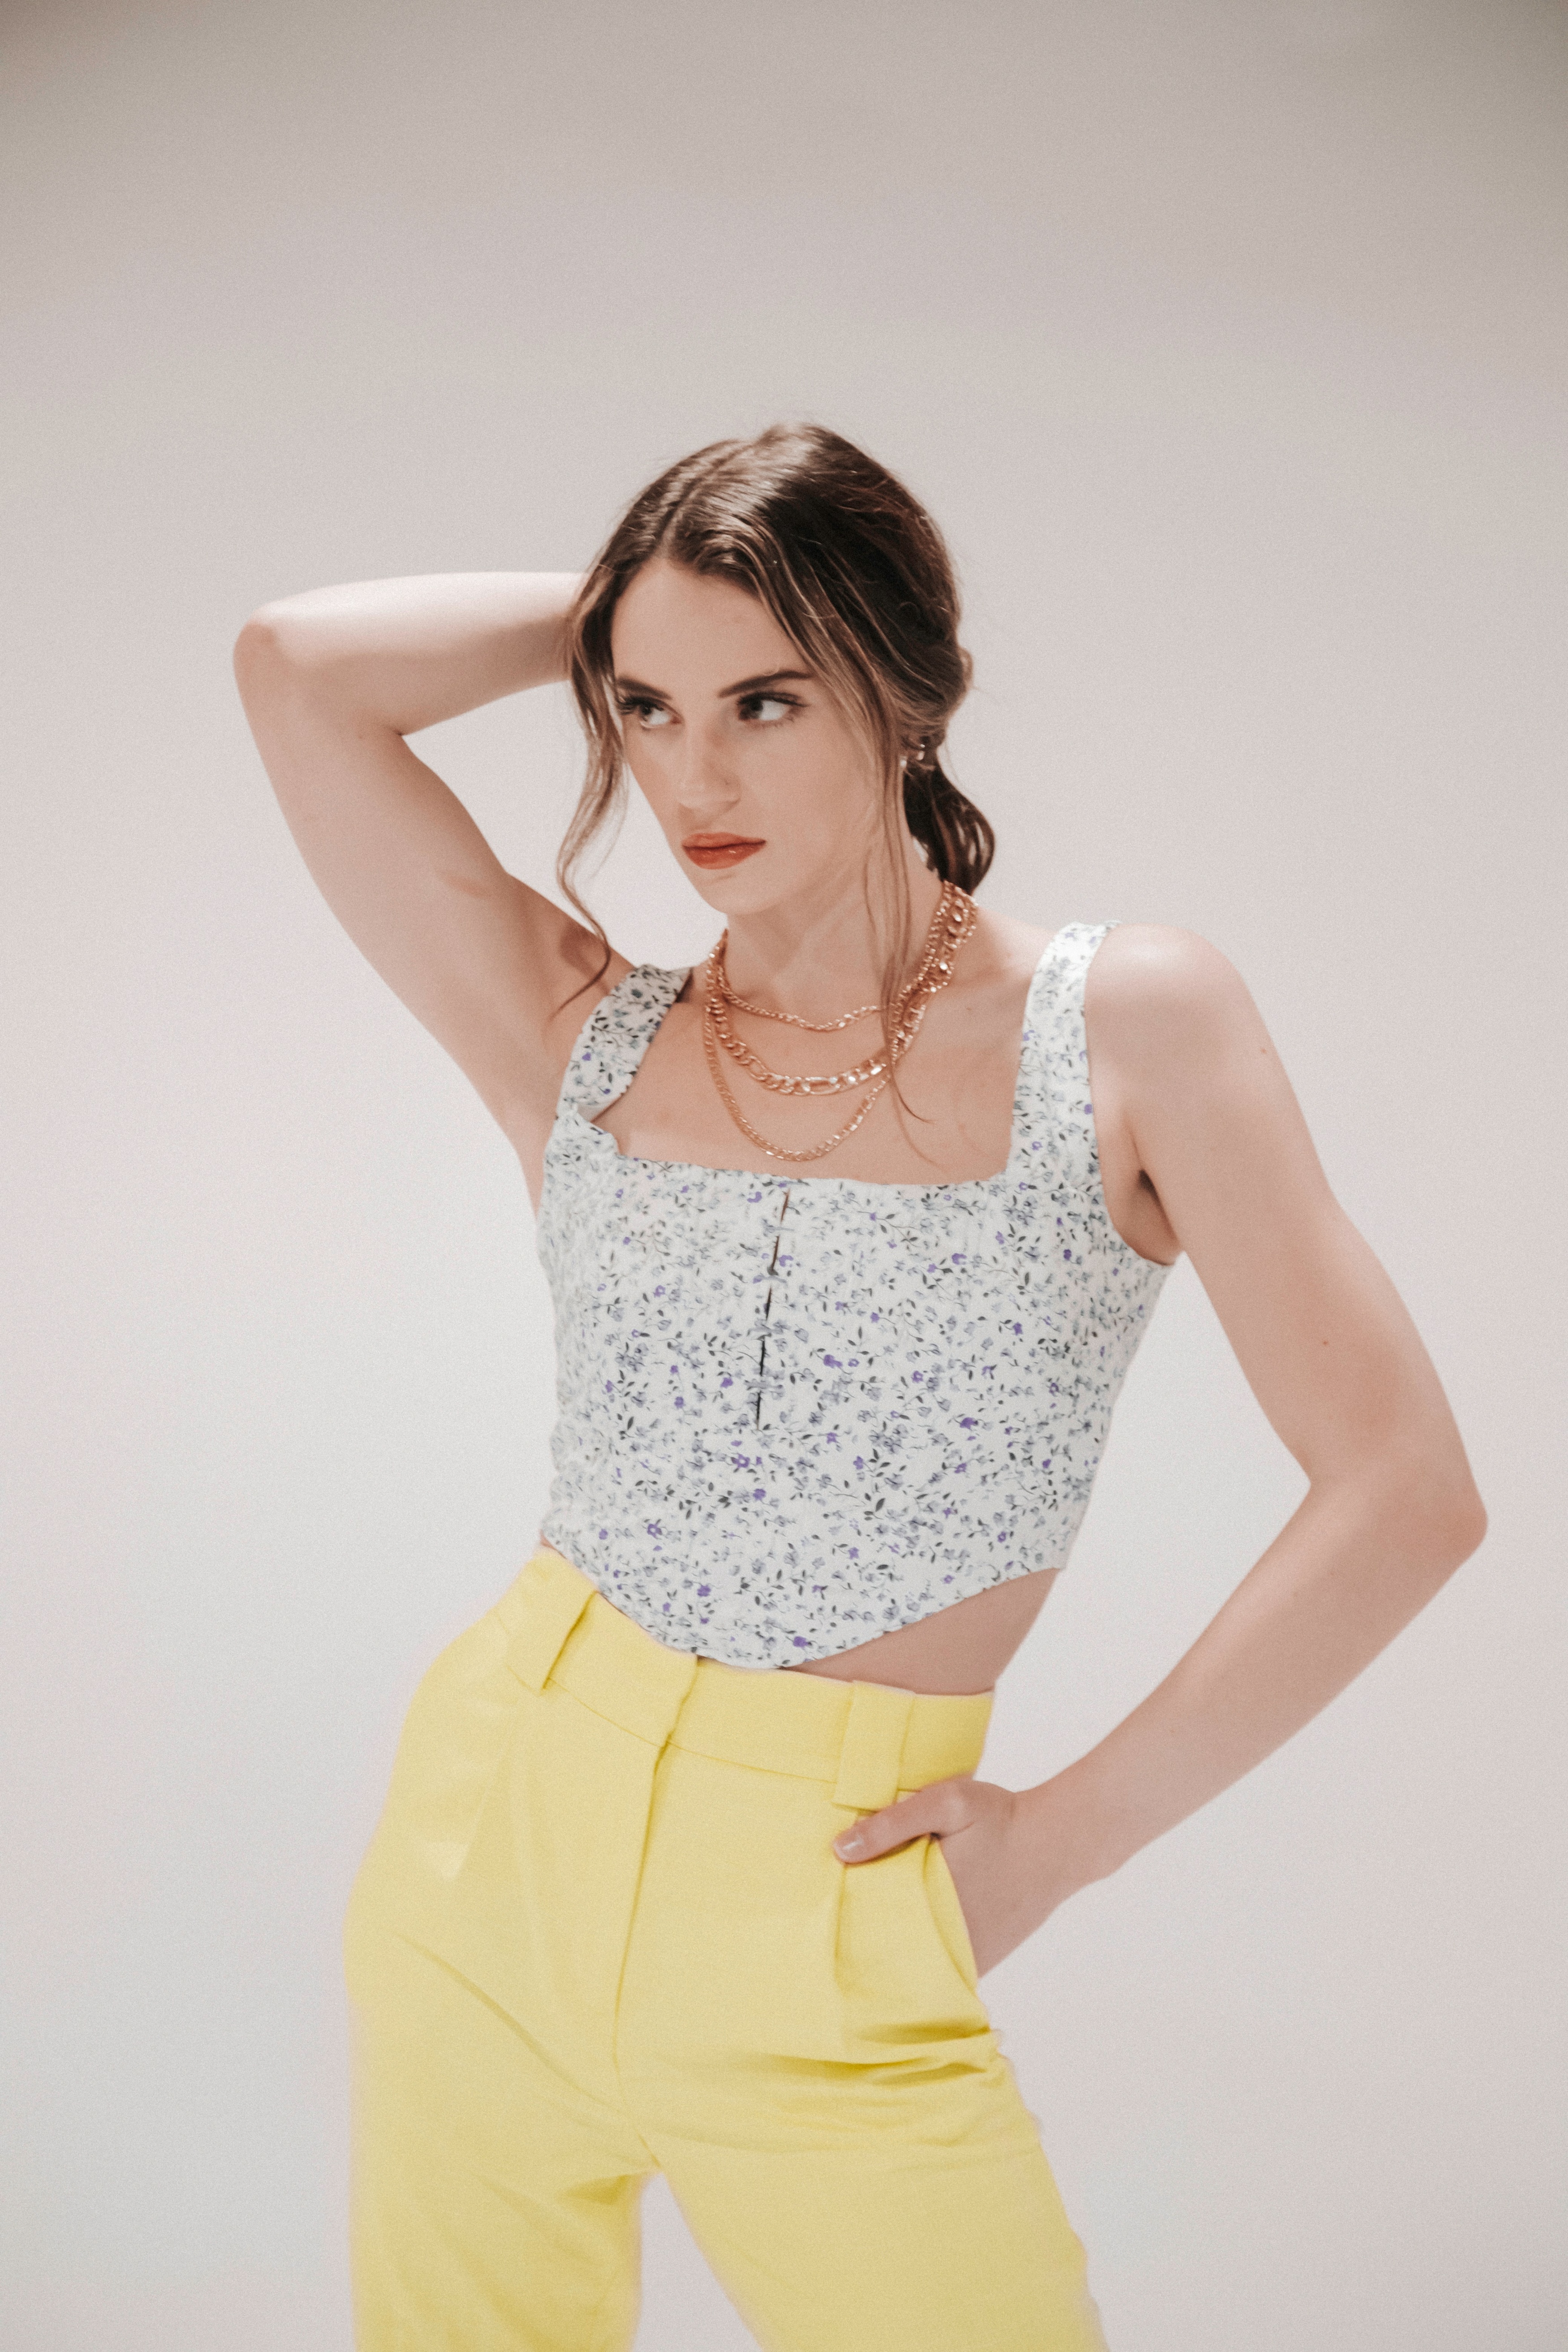 Butterfly Effect Crop Top | Luca and Grae | Crop top outfits, Crop tops, Top  outfits